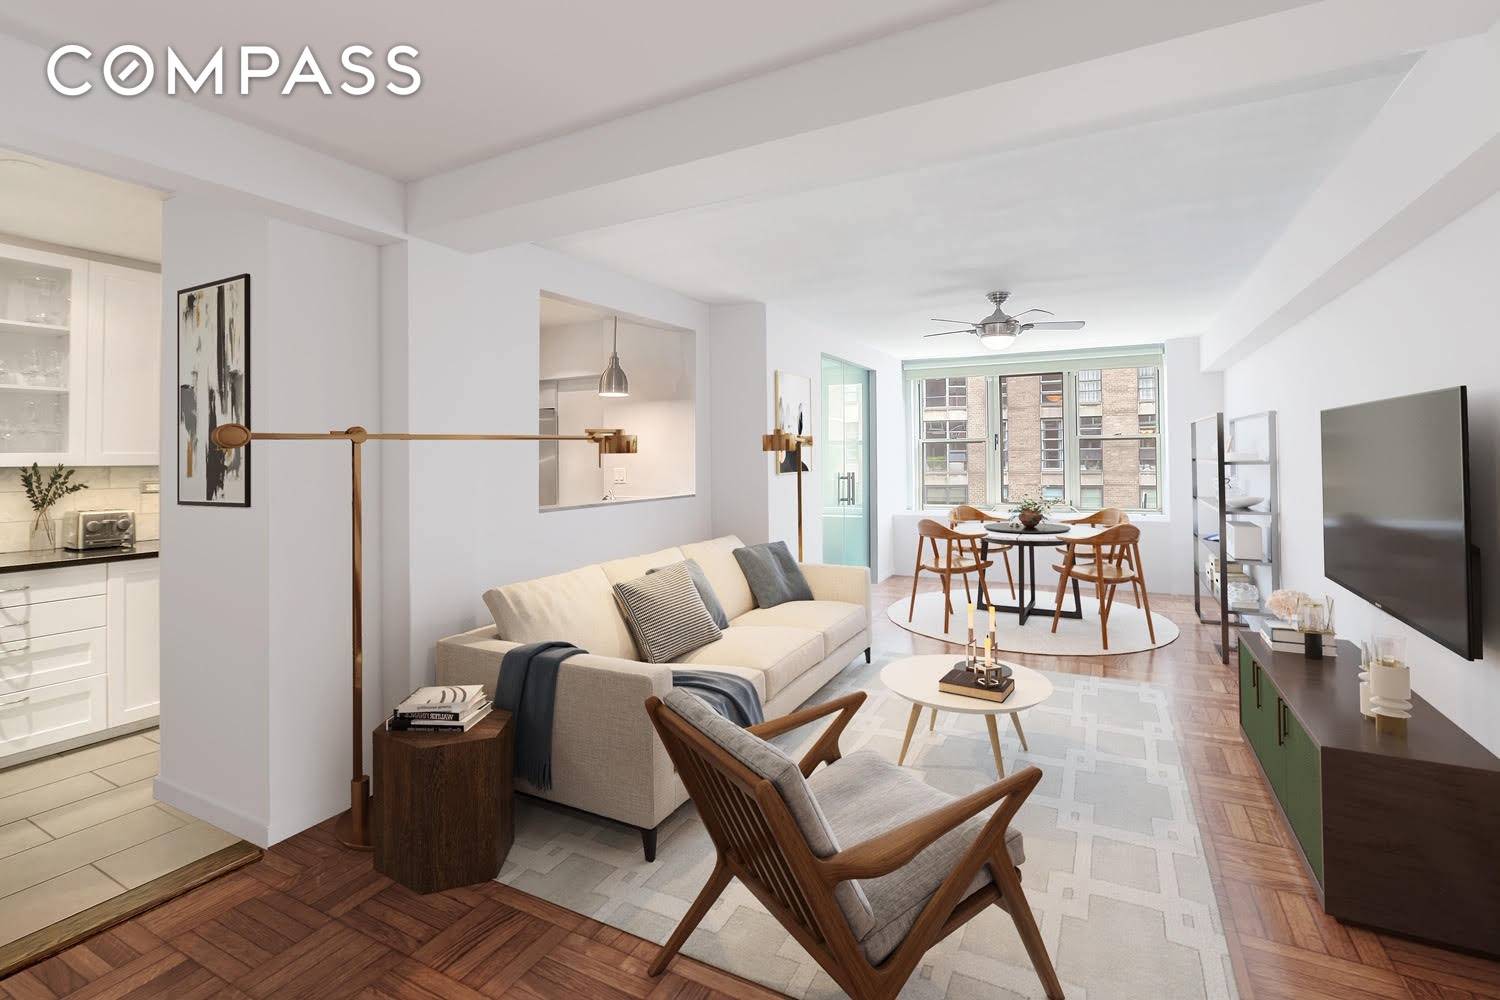 Come home to this sunny south facing, two bed, one bath home in a prime Greenwich Village location.